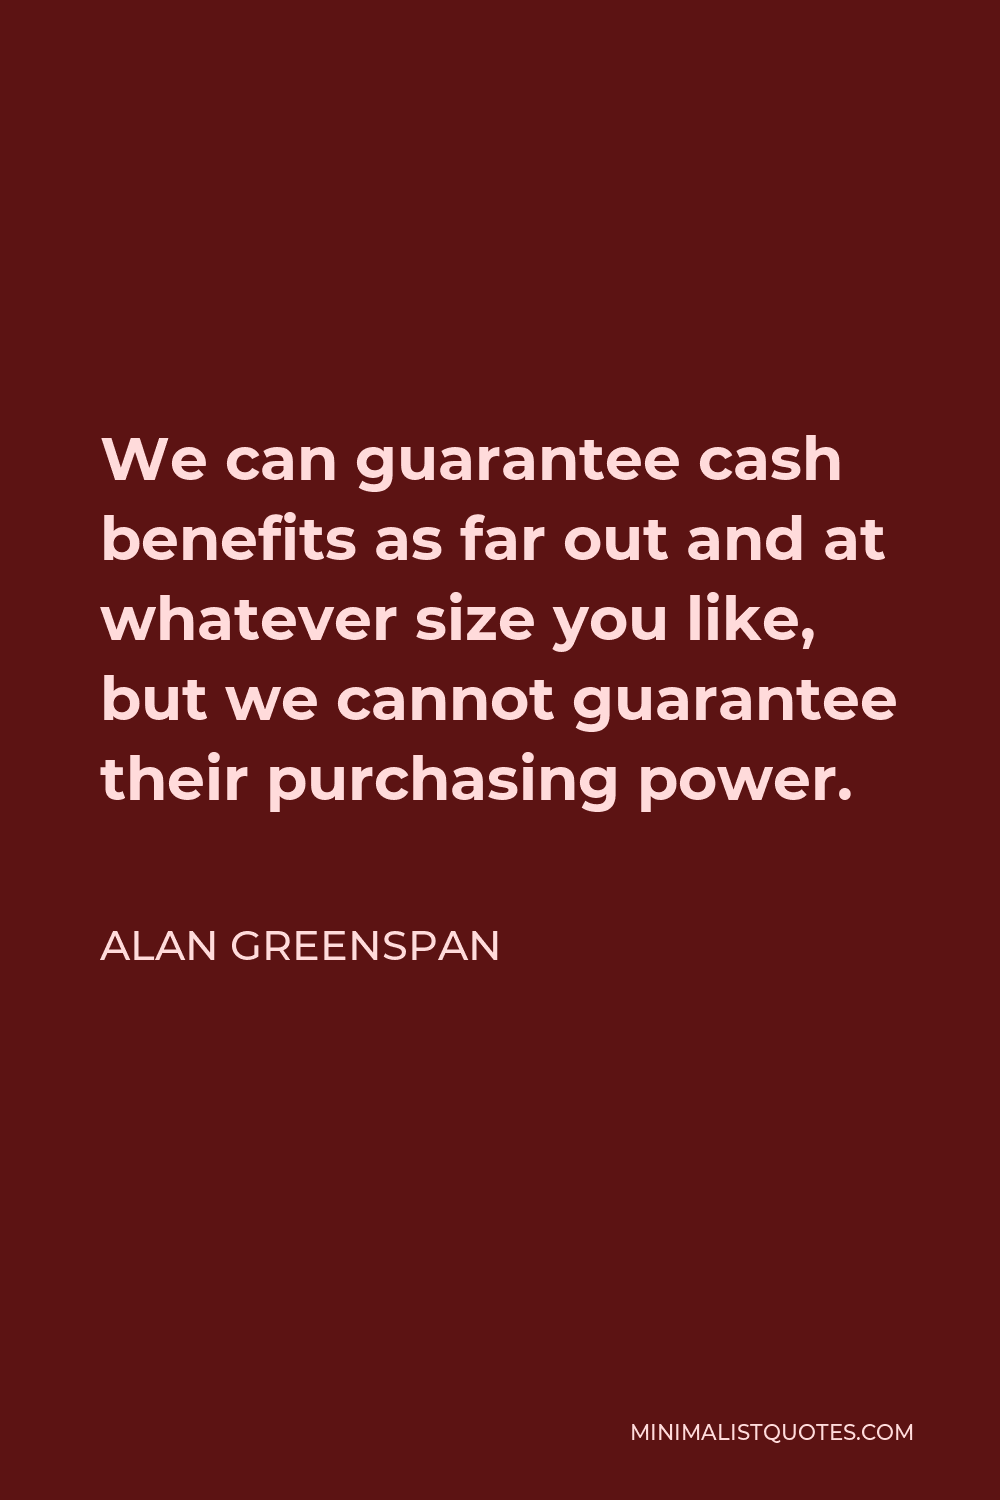 Alan Greenspan Quote - We can guarantee cash benefits as far out and at whatever size you like, but we cannot guarantee their purchasing power.